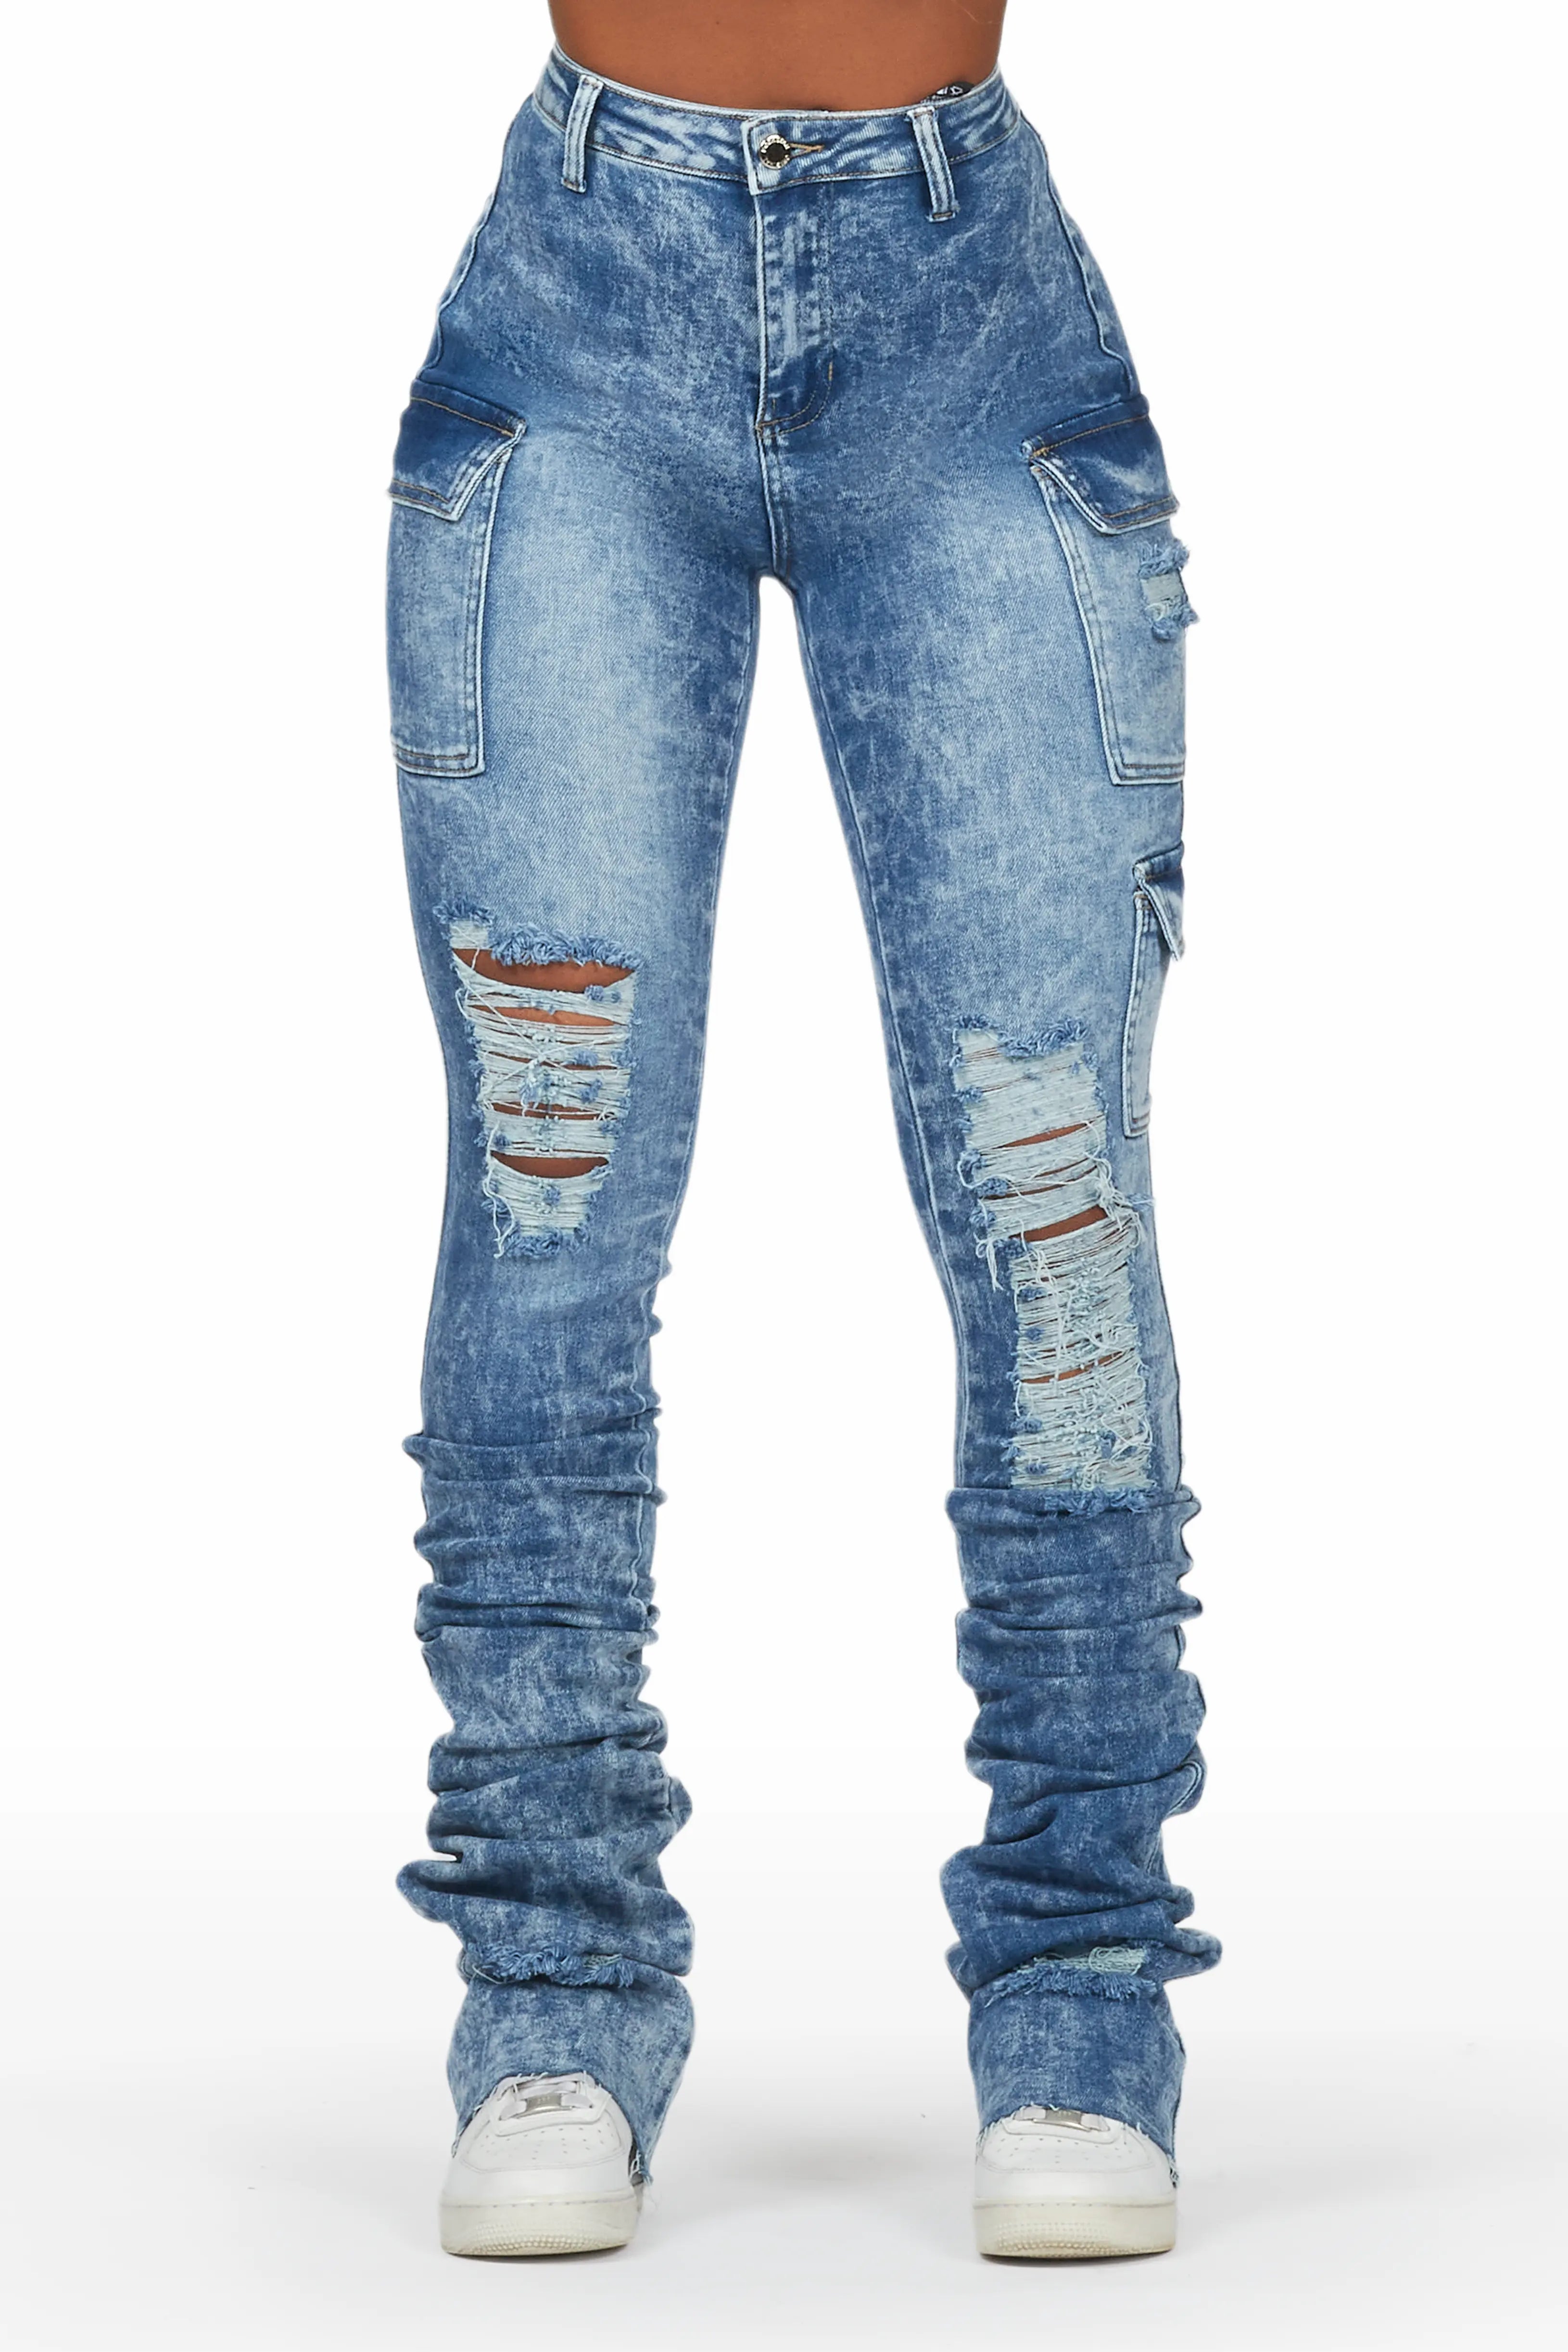 Glkaend Stacked Jeans for Women Stretch Mid Rise Classic Skinny